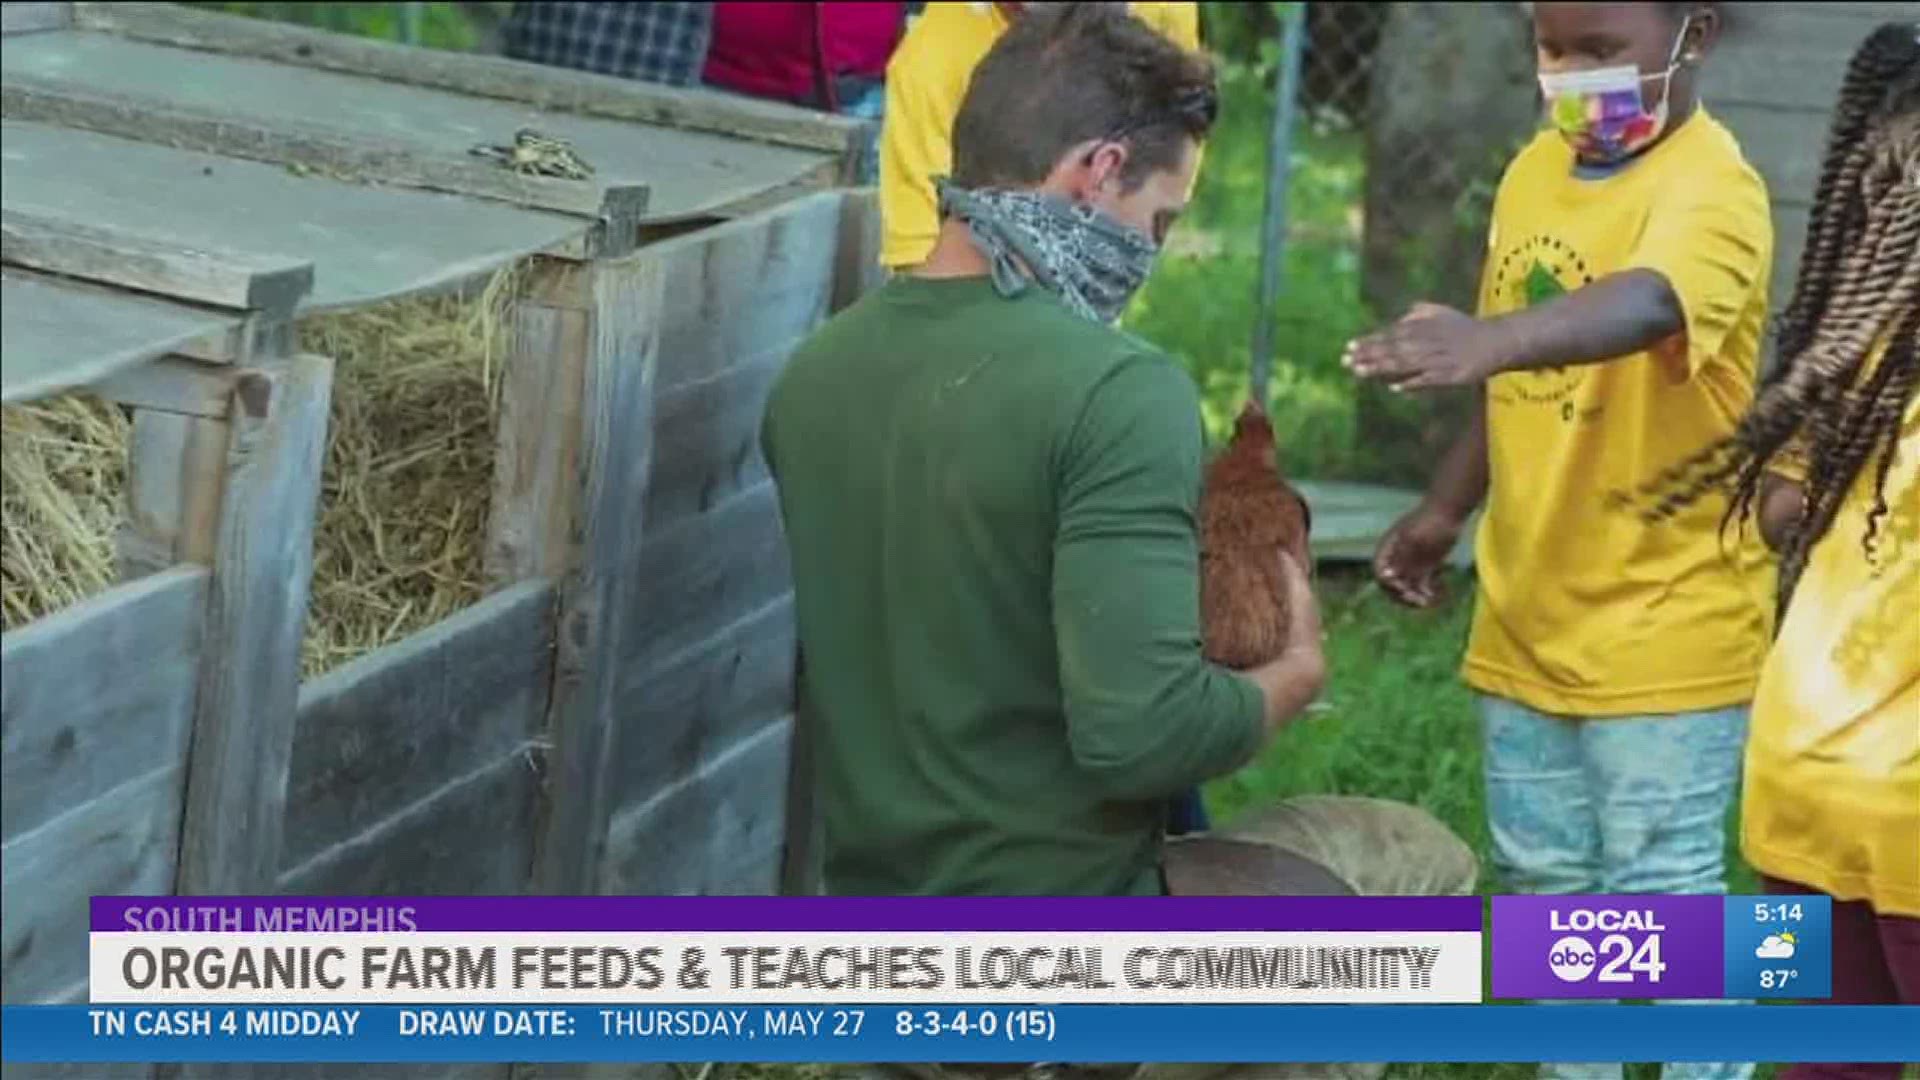 A hidden gem, the Green Leaf Learning Farm was started to support the nutritional needs or the community where healthy food options are limited.